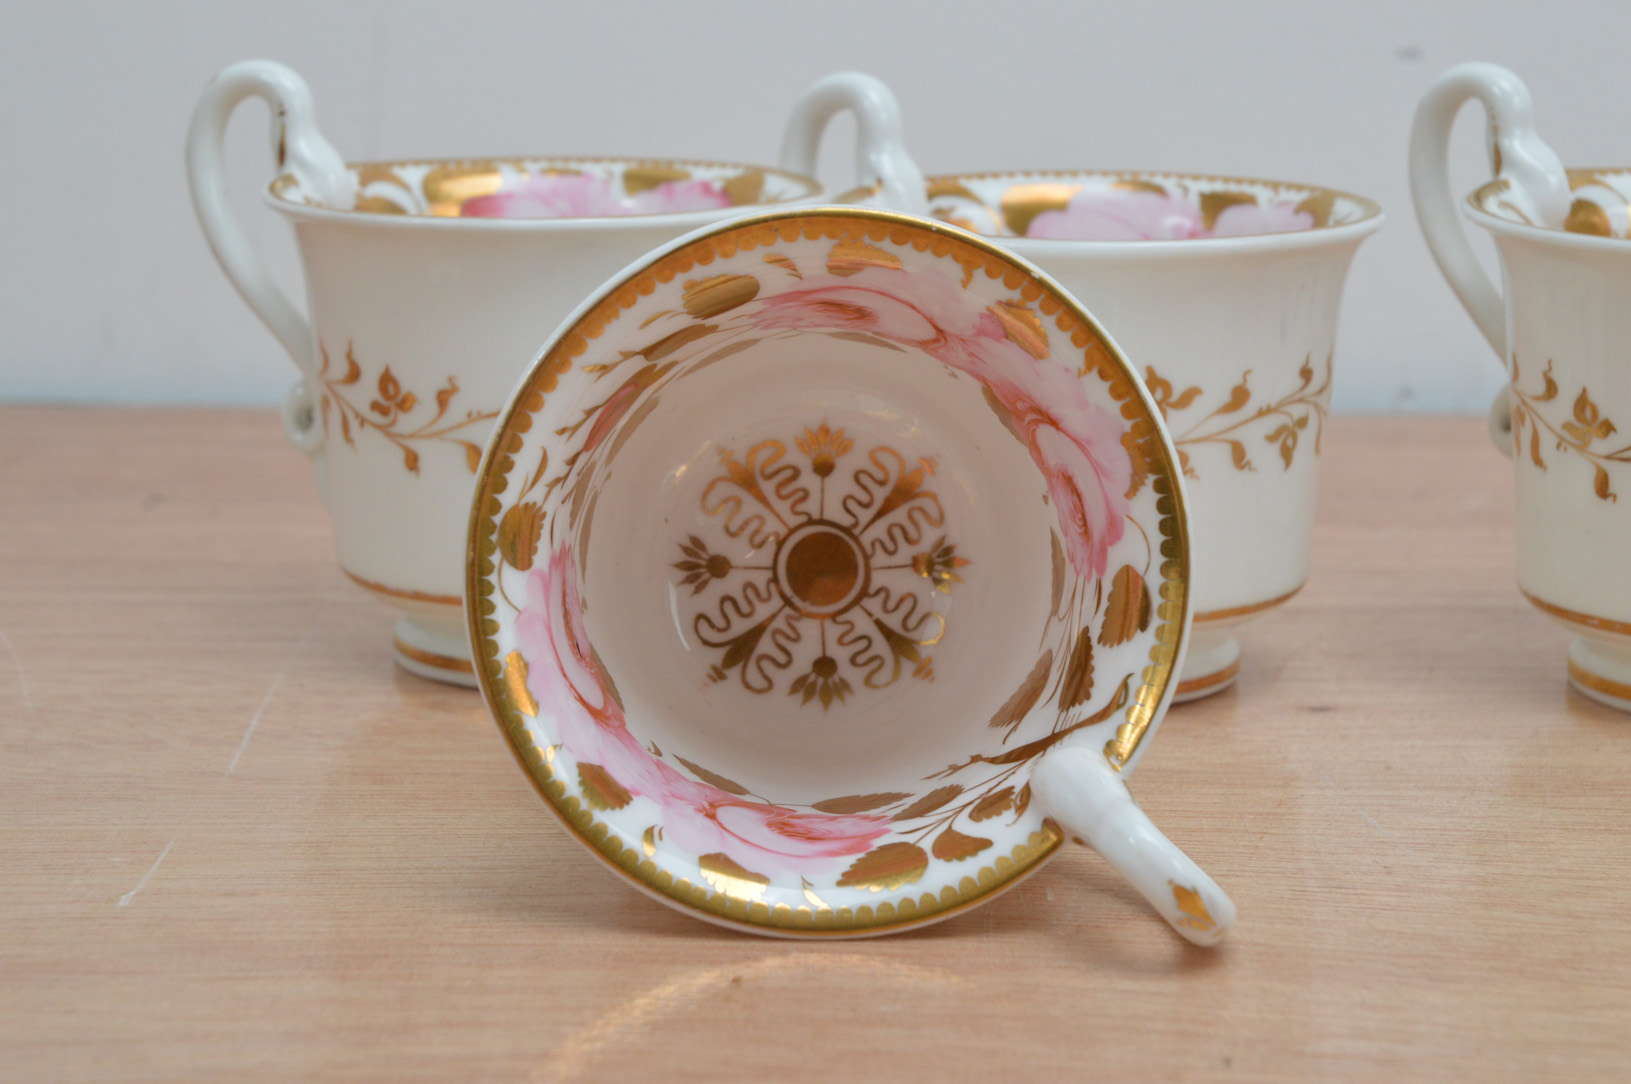 Six early 19th century Spode porcelain tea cups, hand painted floral design with gilt work on a - Image 3 of 4